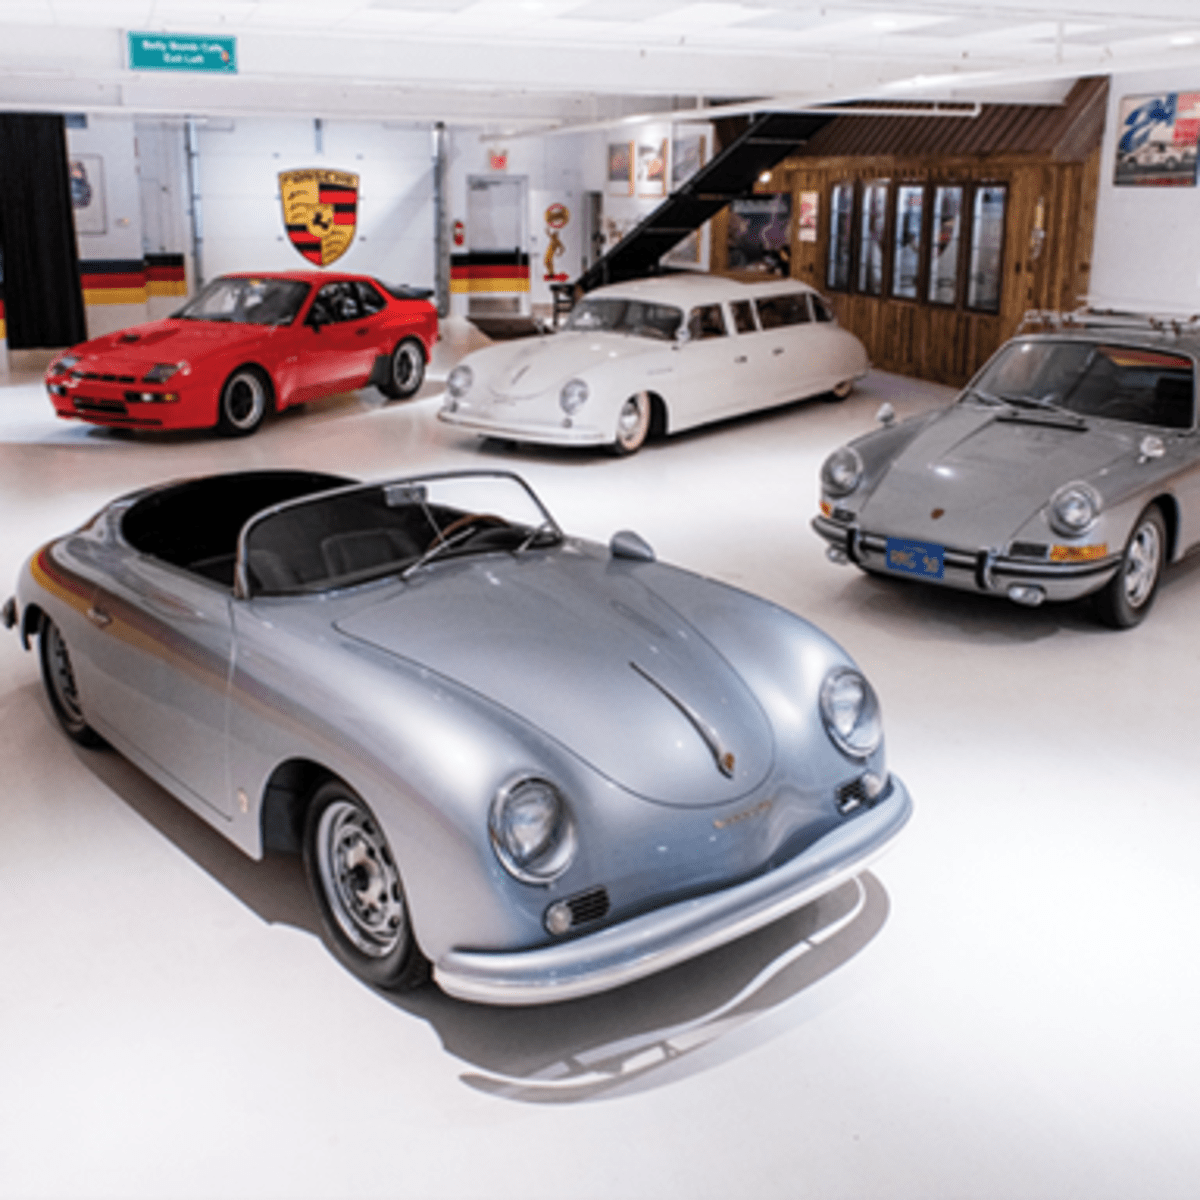 Porsches abound at RM Sotheby's Taj Ma Garaj Collection sale - Old Cars  Weekly